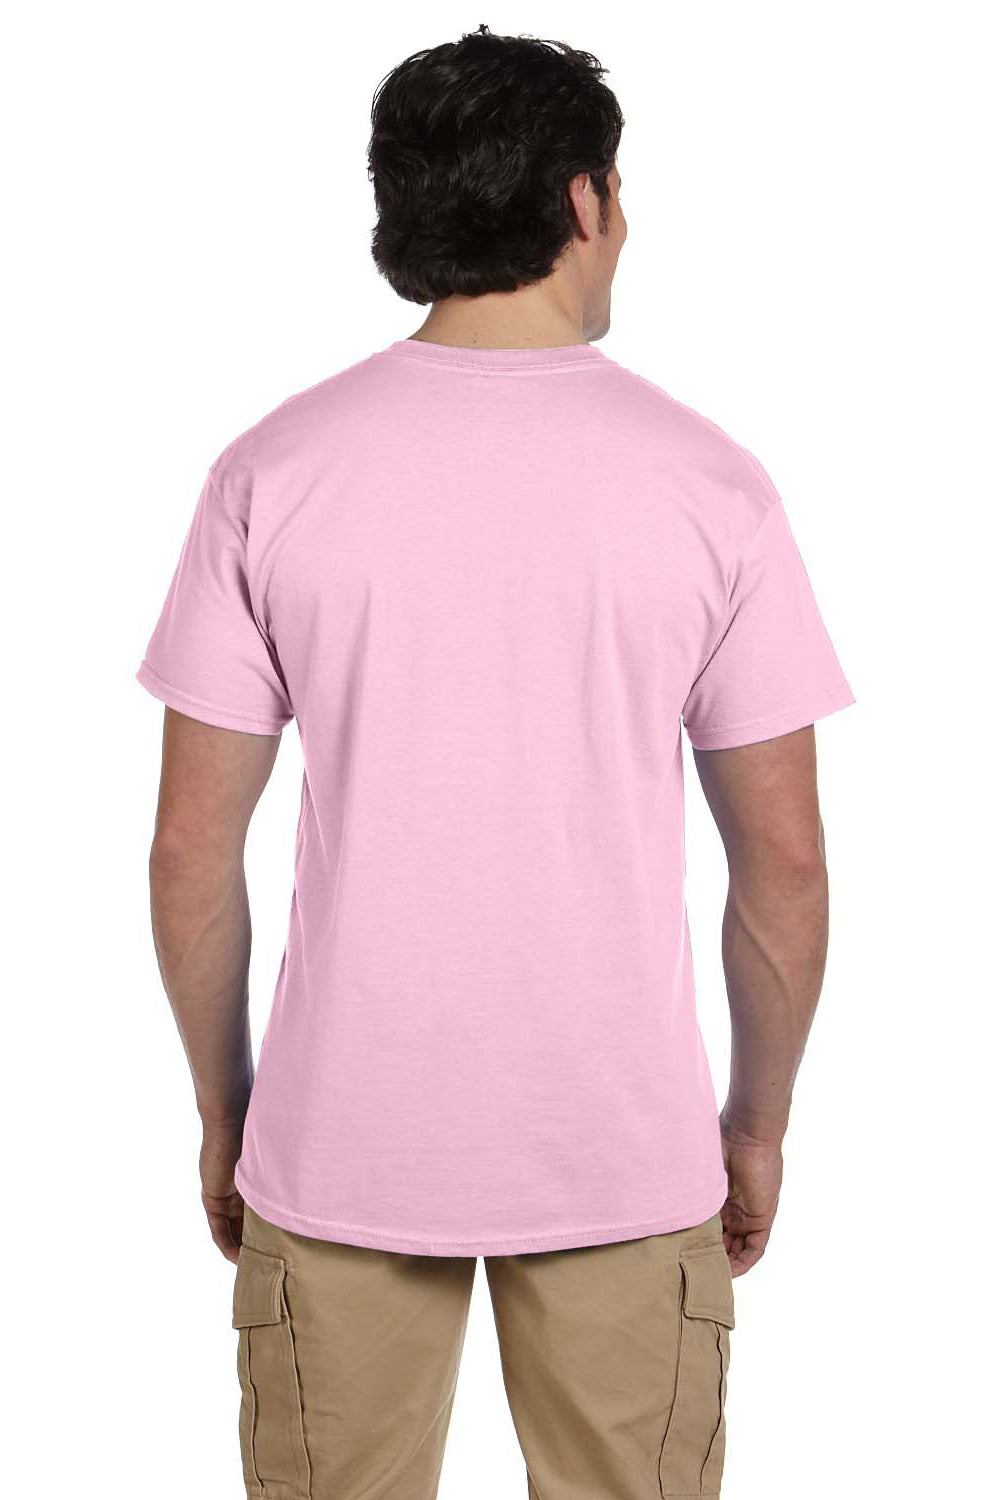 Fruit Of The Loom 3931 Mens HD Jersey Short Sleeve Crewneck T-Shirt Classic Pink Back